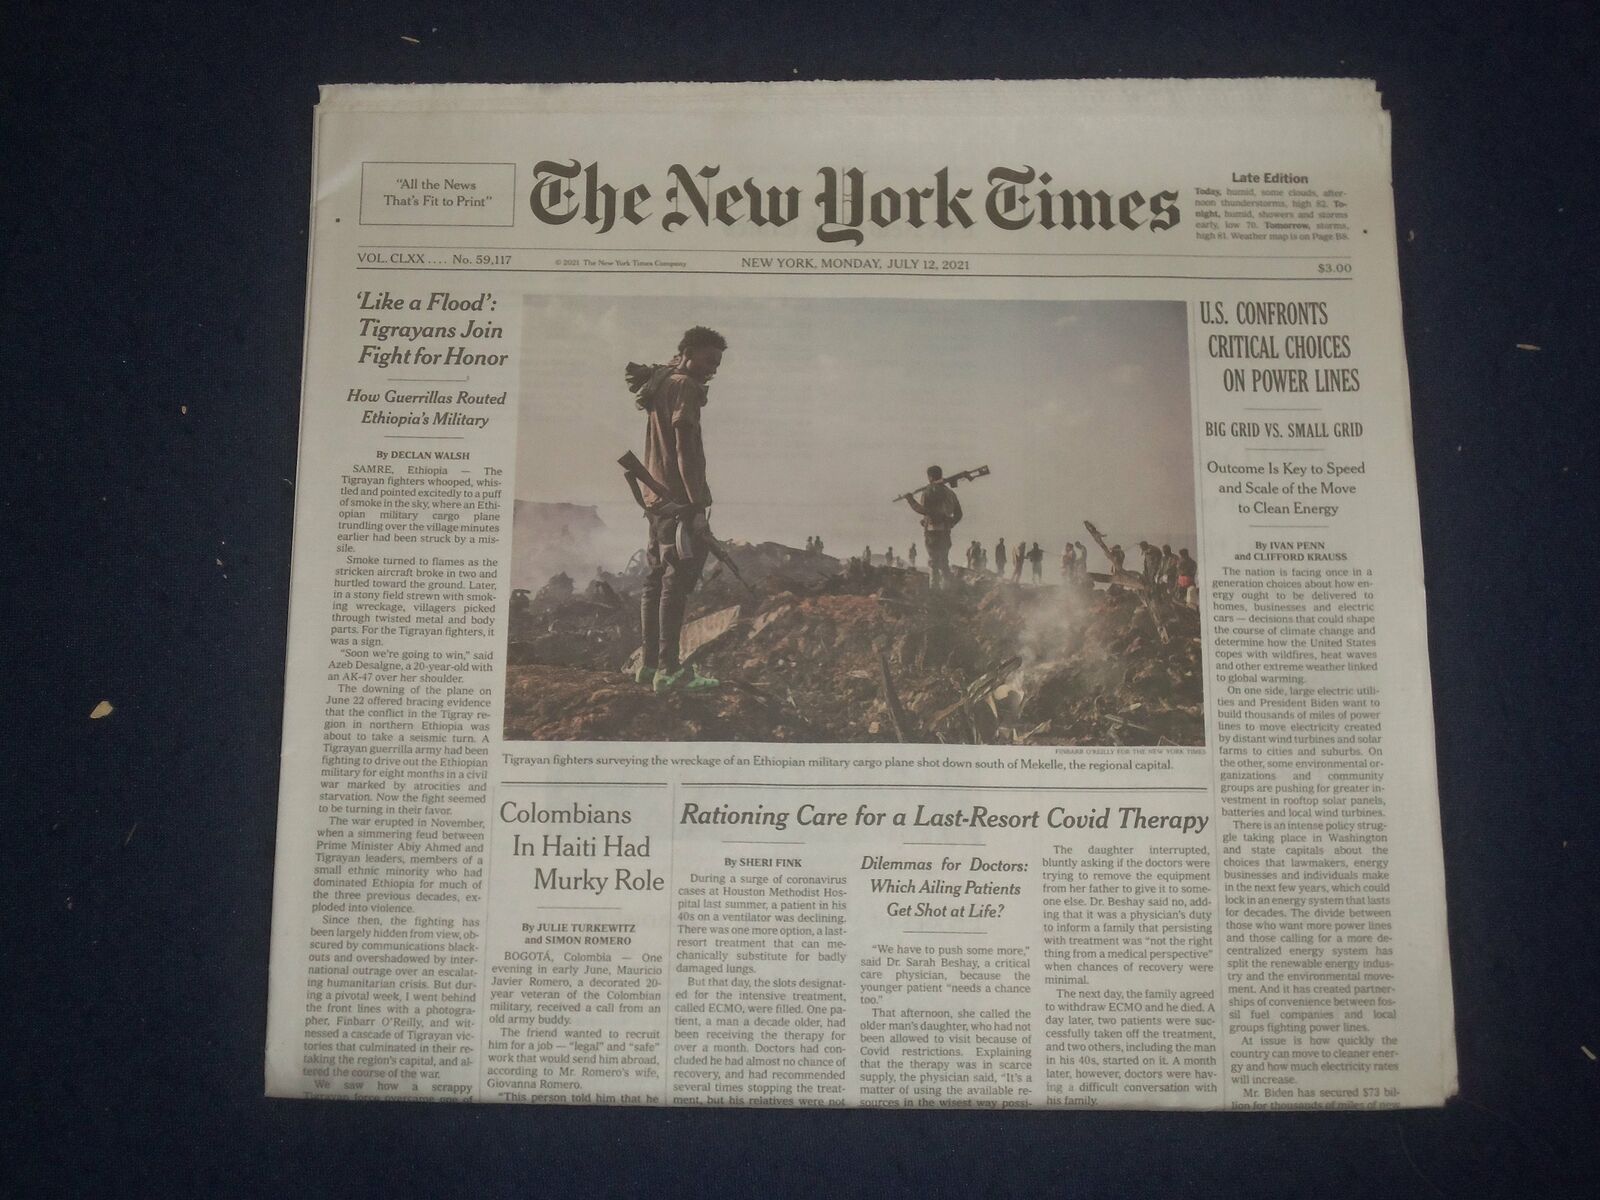 2021 JULY 12 NEW YORK TIMES - U.S. CONFRONTS CRITICAL CHOICES ON POWER LINES